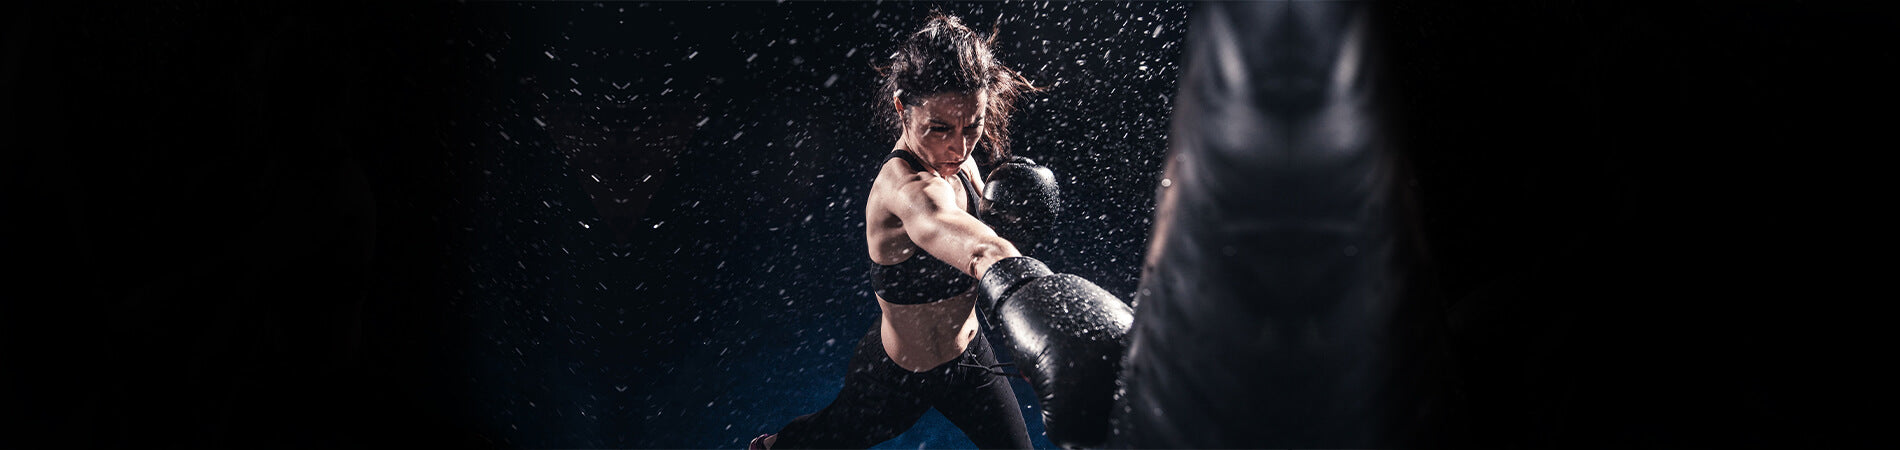 Here are the Best Cardio Boxing Workouts to Get You in Serious Shape